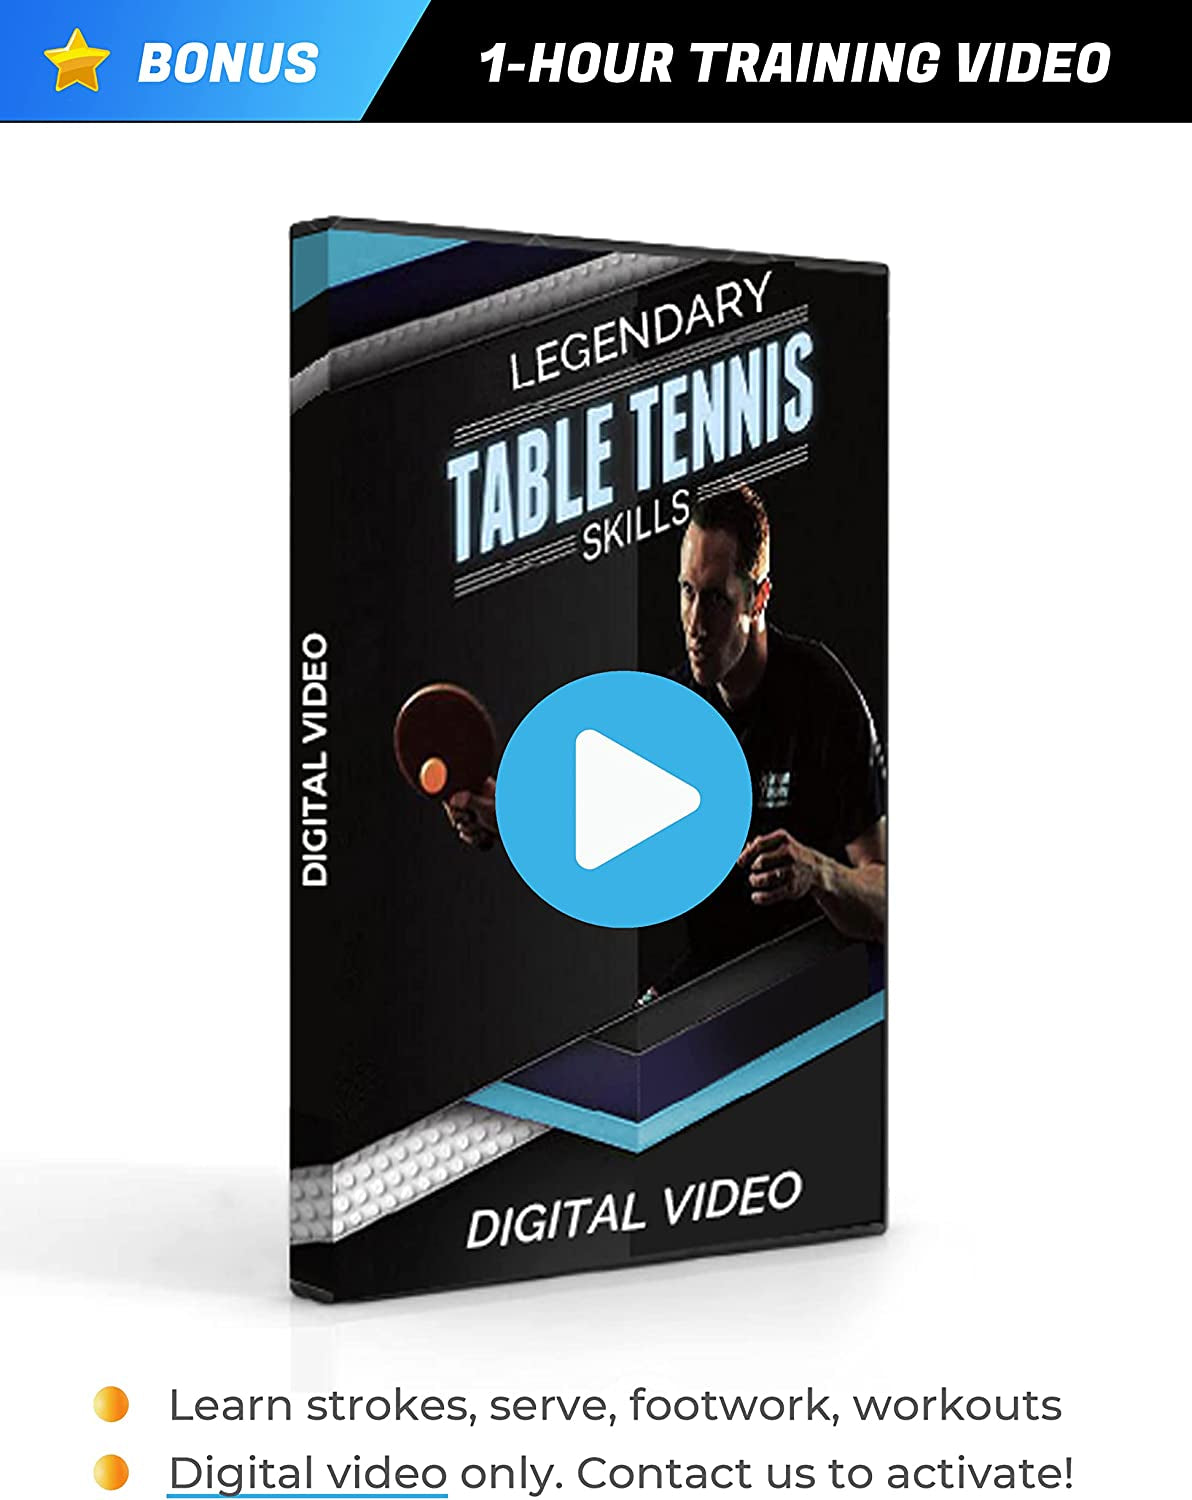 "Enhance Your Skills with the Premium Ping Pong Racket Set - Includes Paddle, Case, and Training Video"